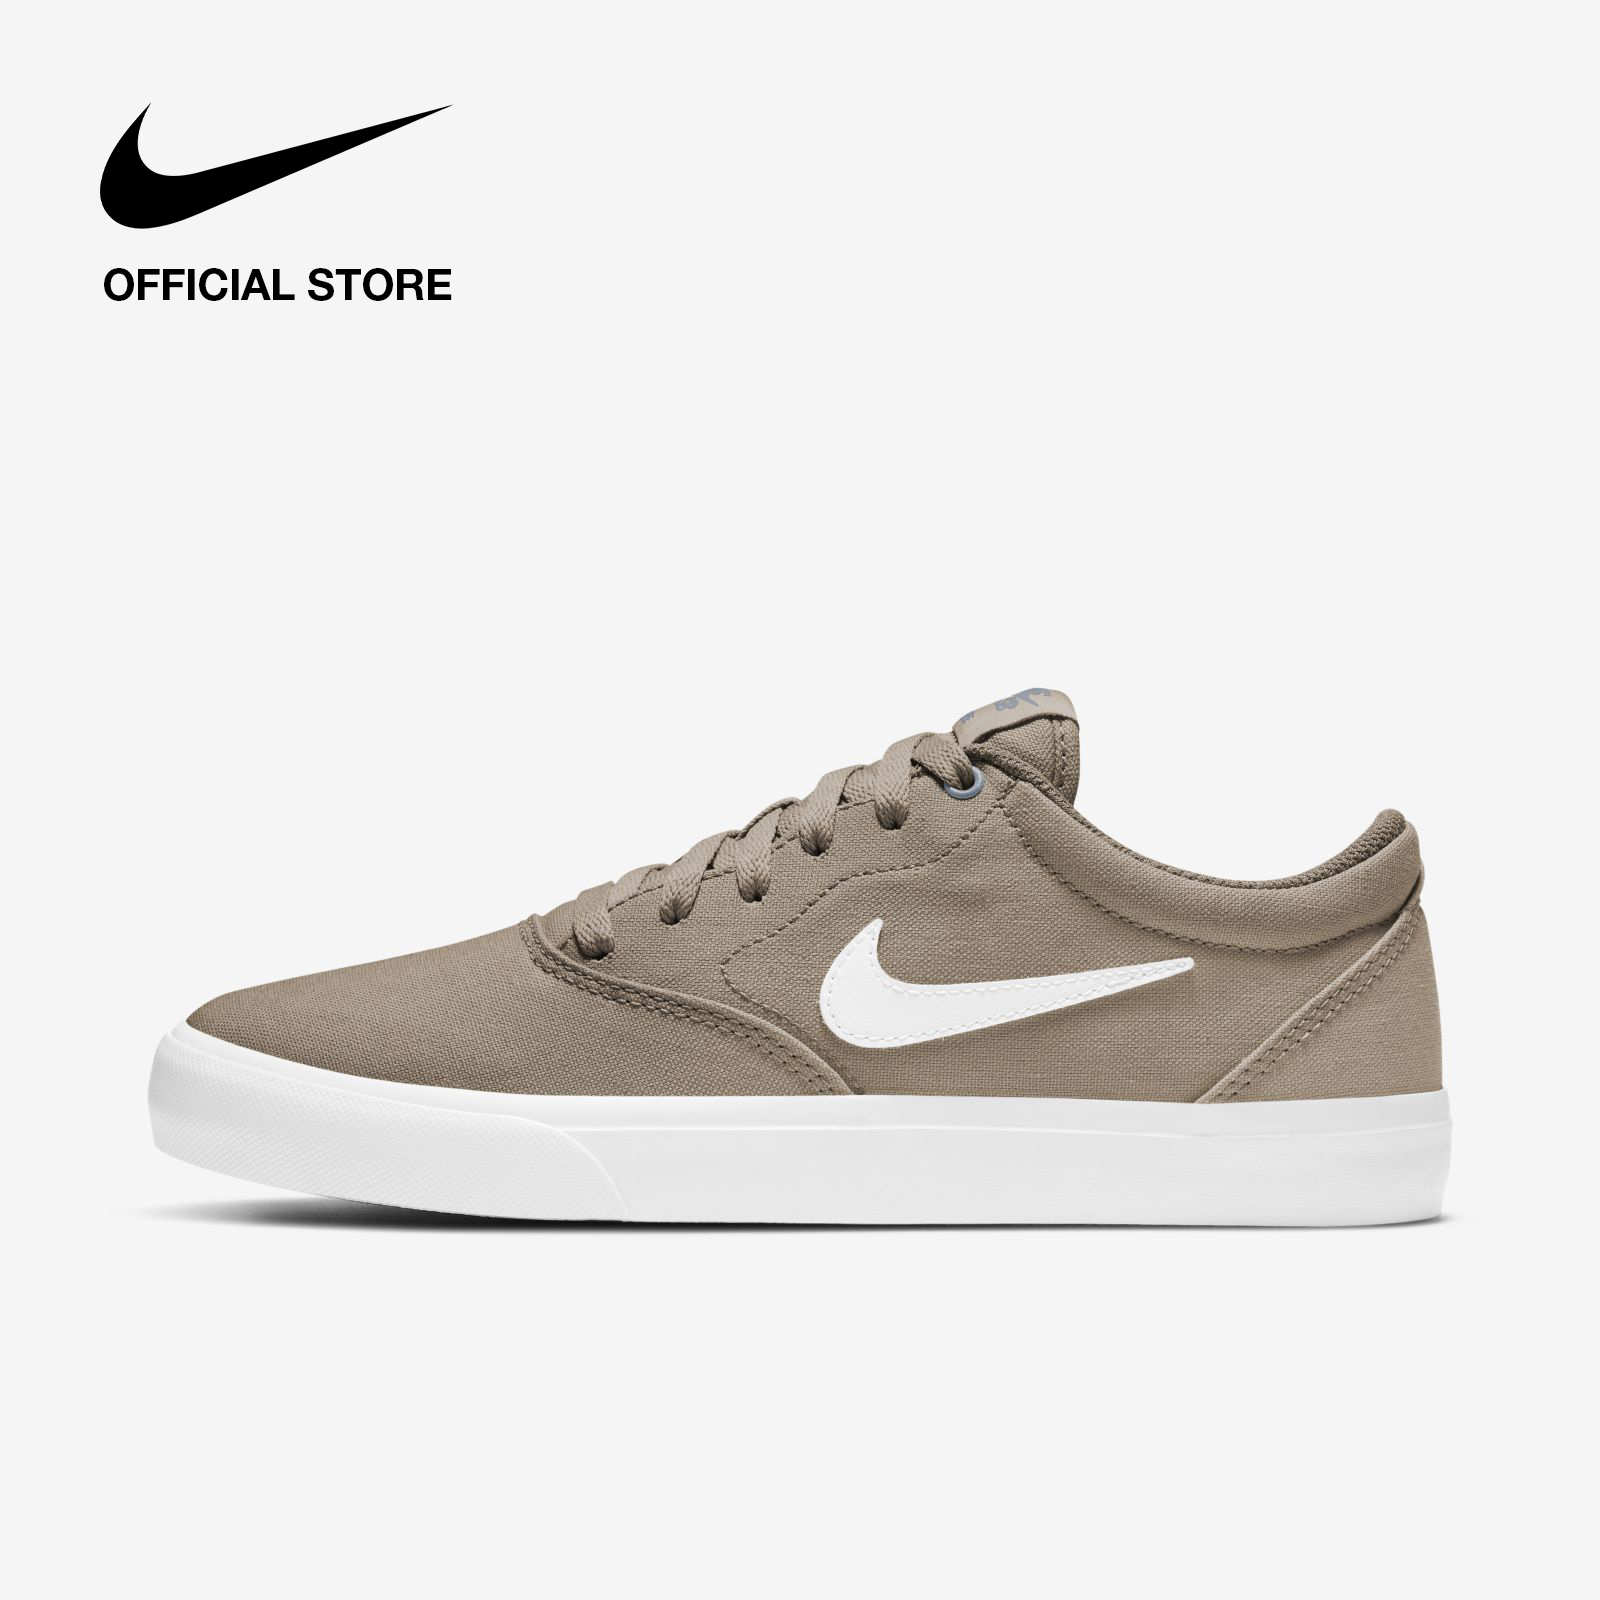 Nike SB Men's Charge Canvas Skate Shoes 